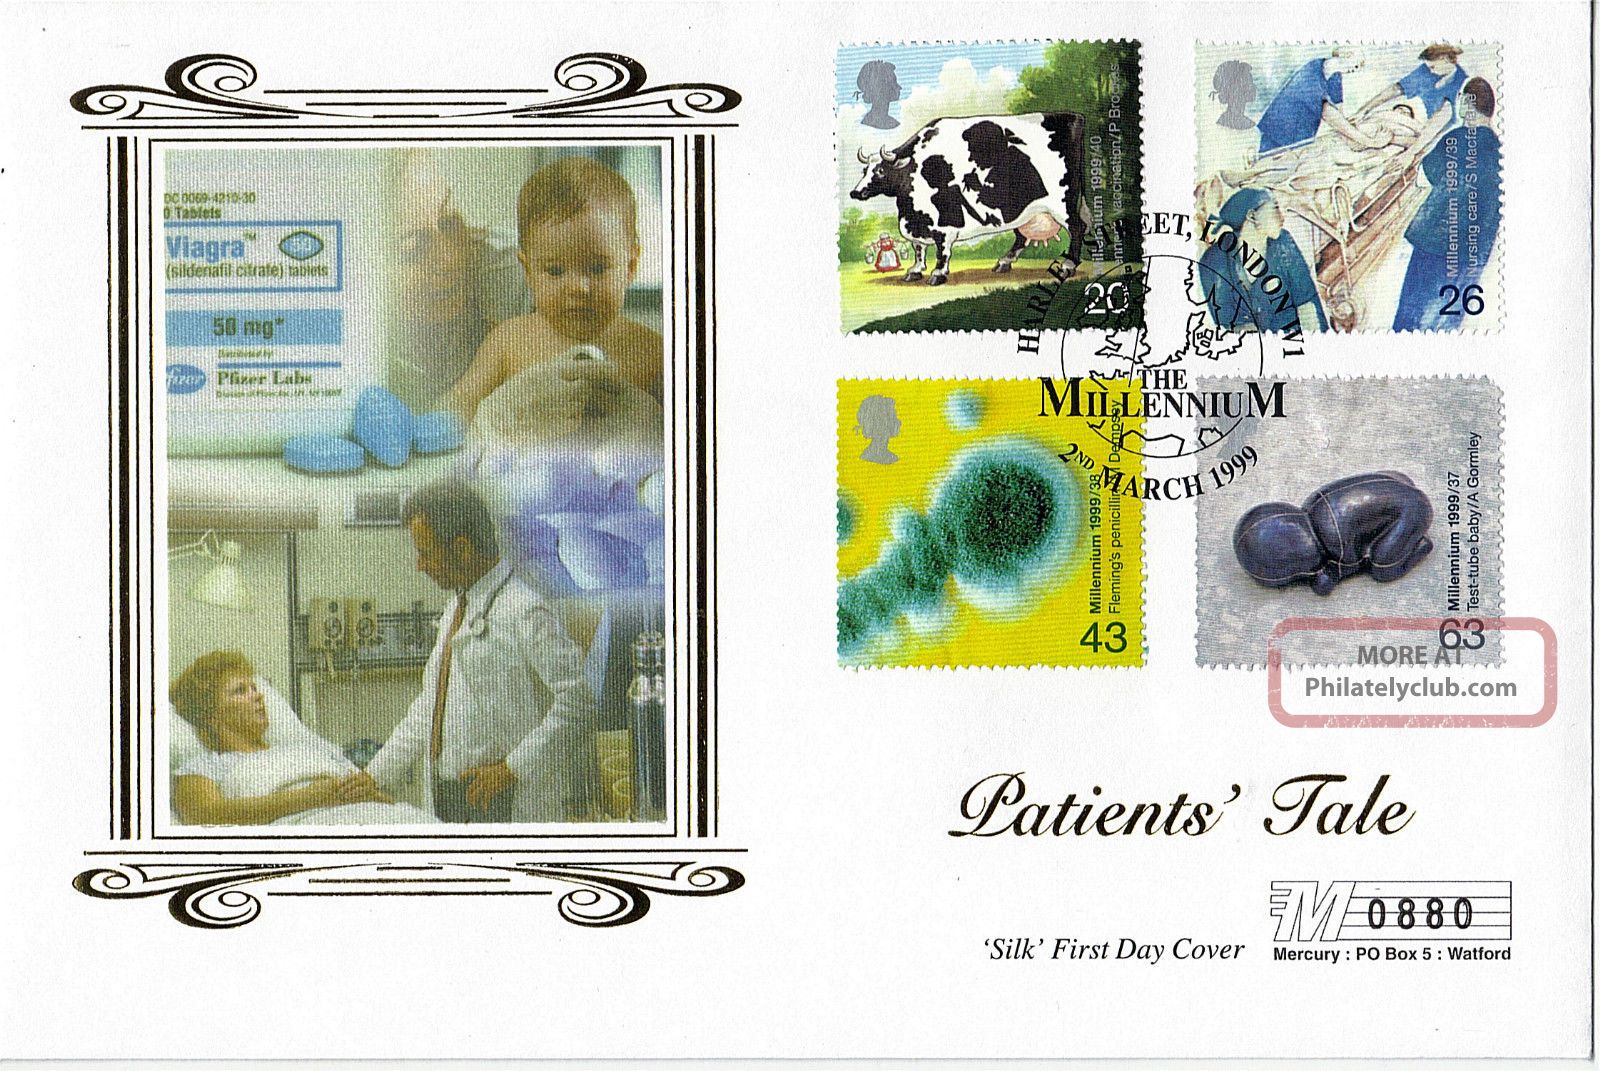 2 March 1999 Patients Tale Mercury Silk Limited Edition First Day Cover Shs Organizations photo